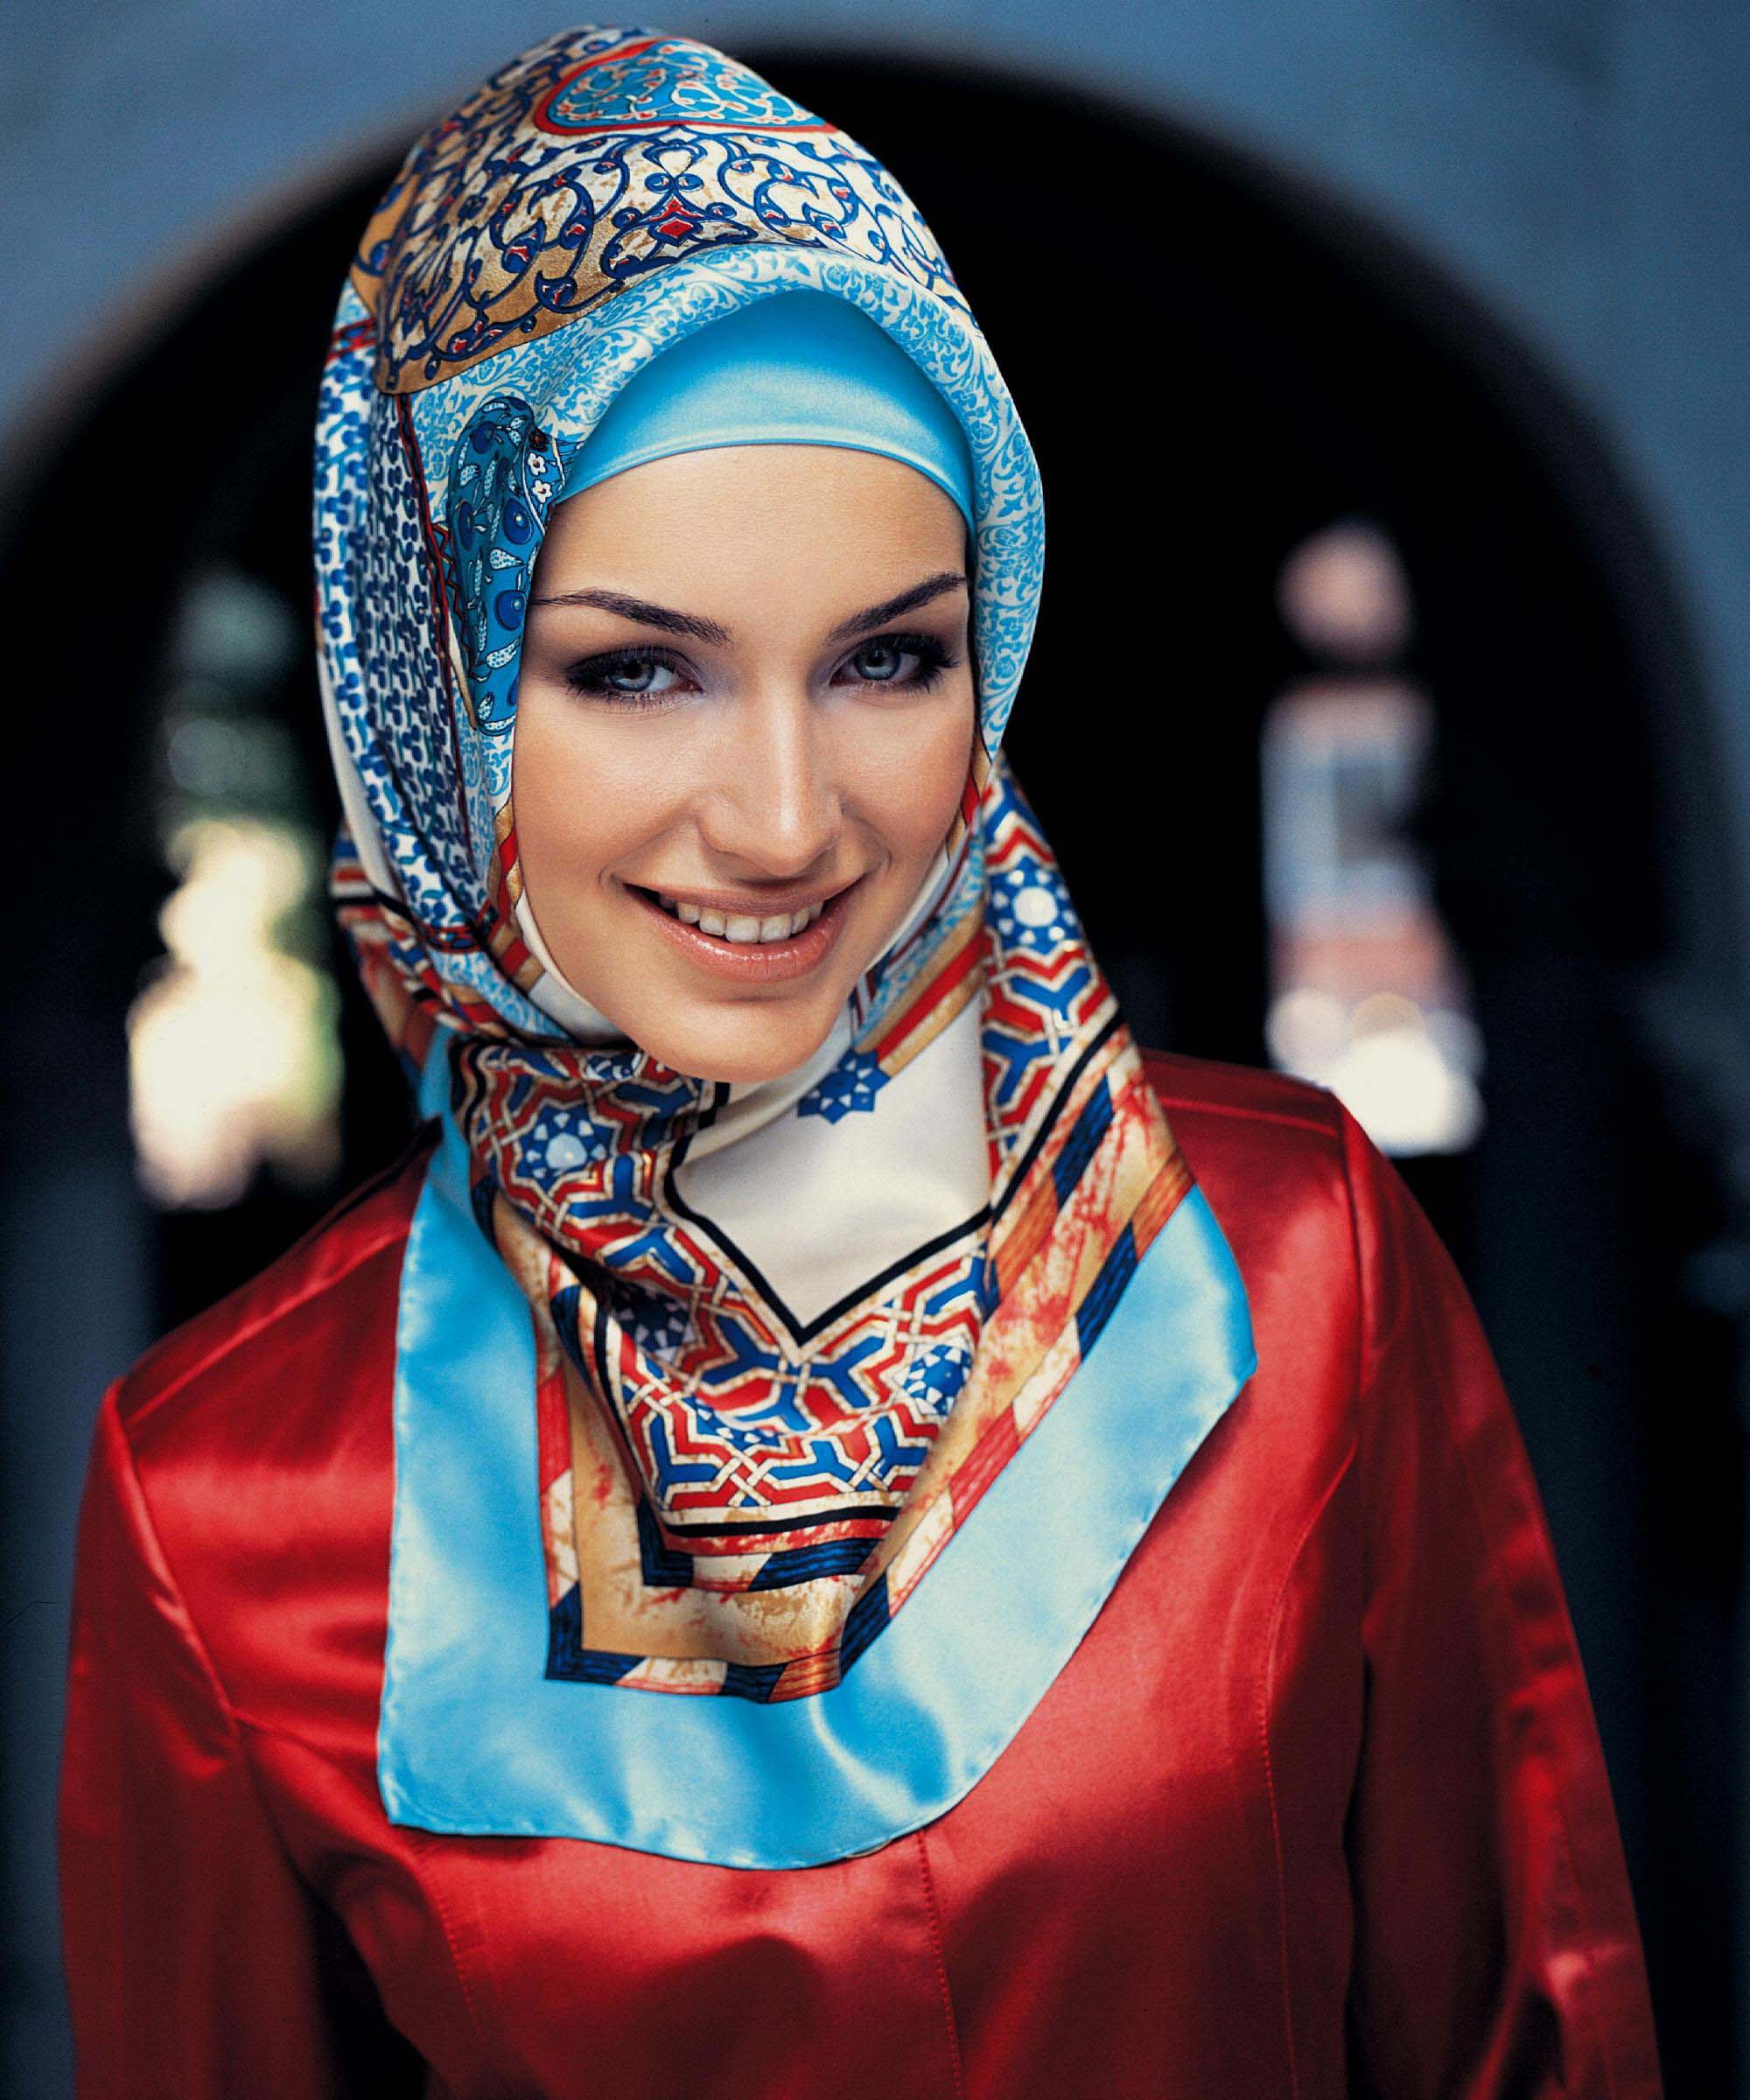 47 SAFETY TIPS FOR MUSLIM WOMEN